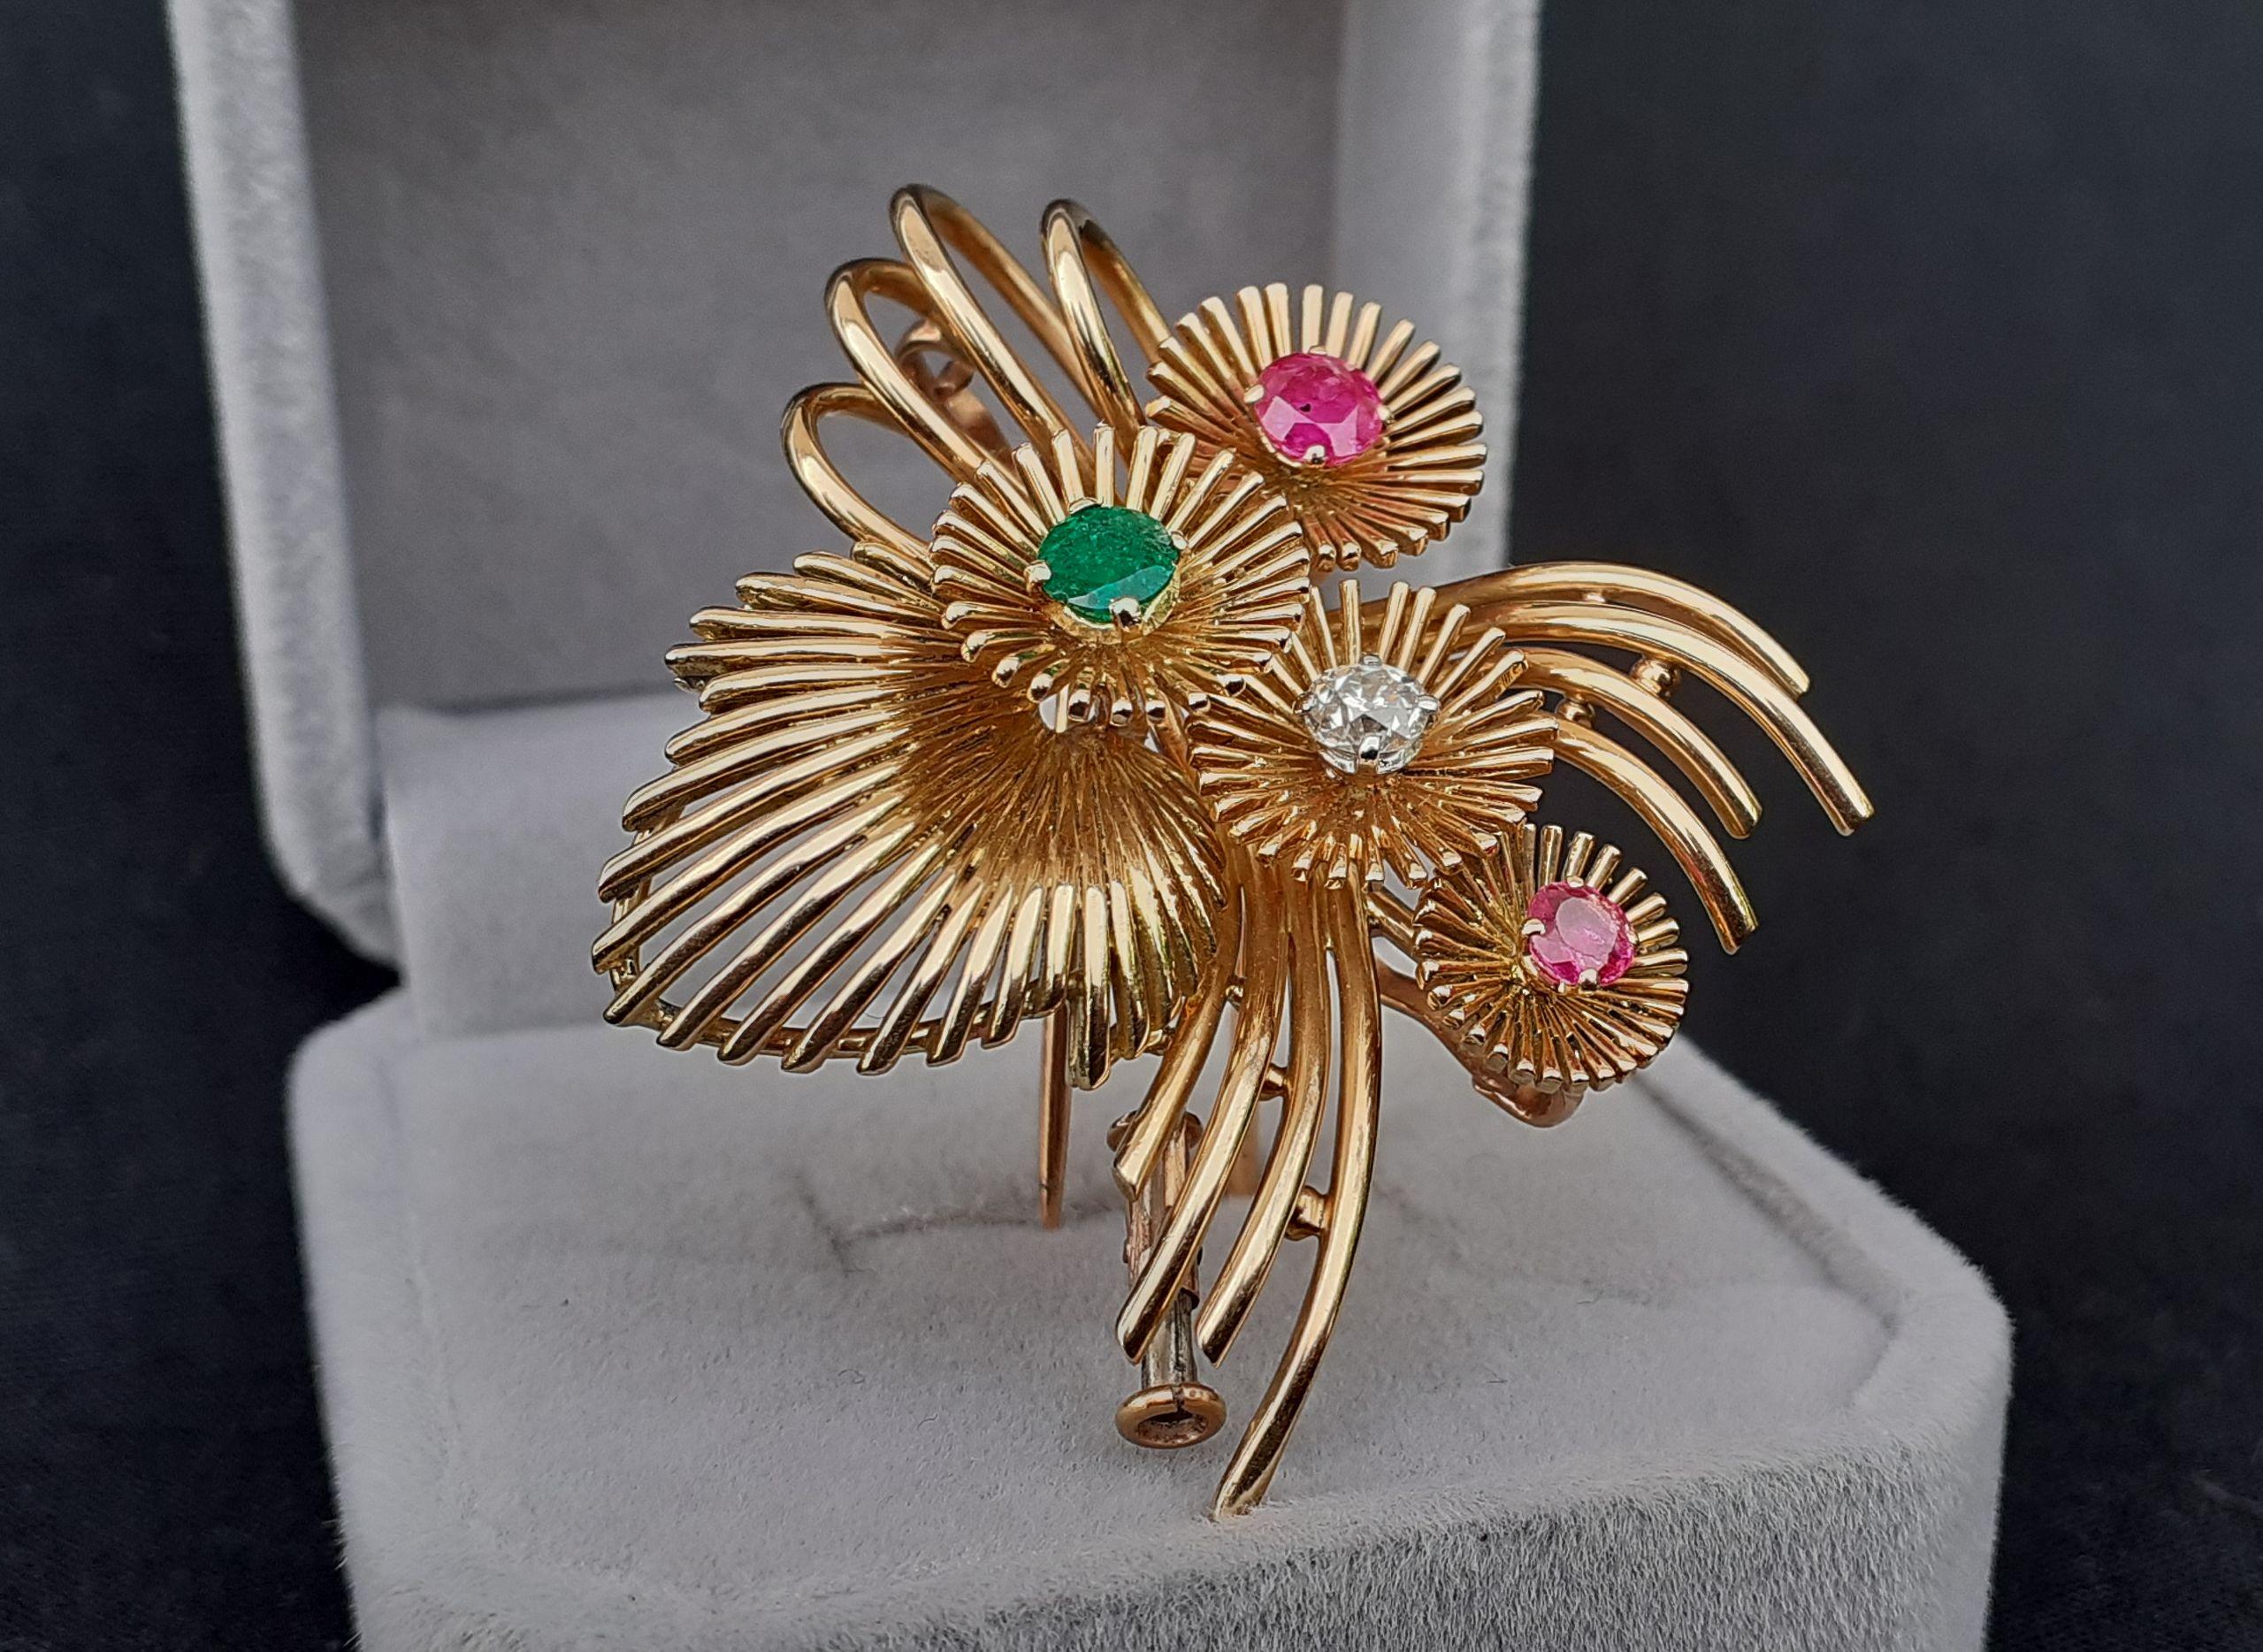 Sumptuous Bouquet of Flowers Lapel Pin Brooch in Gold and Gems For Sale 7